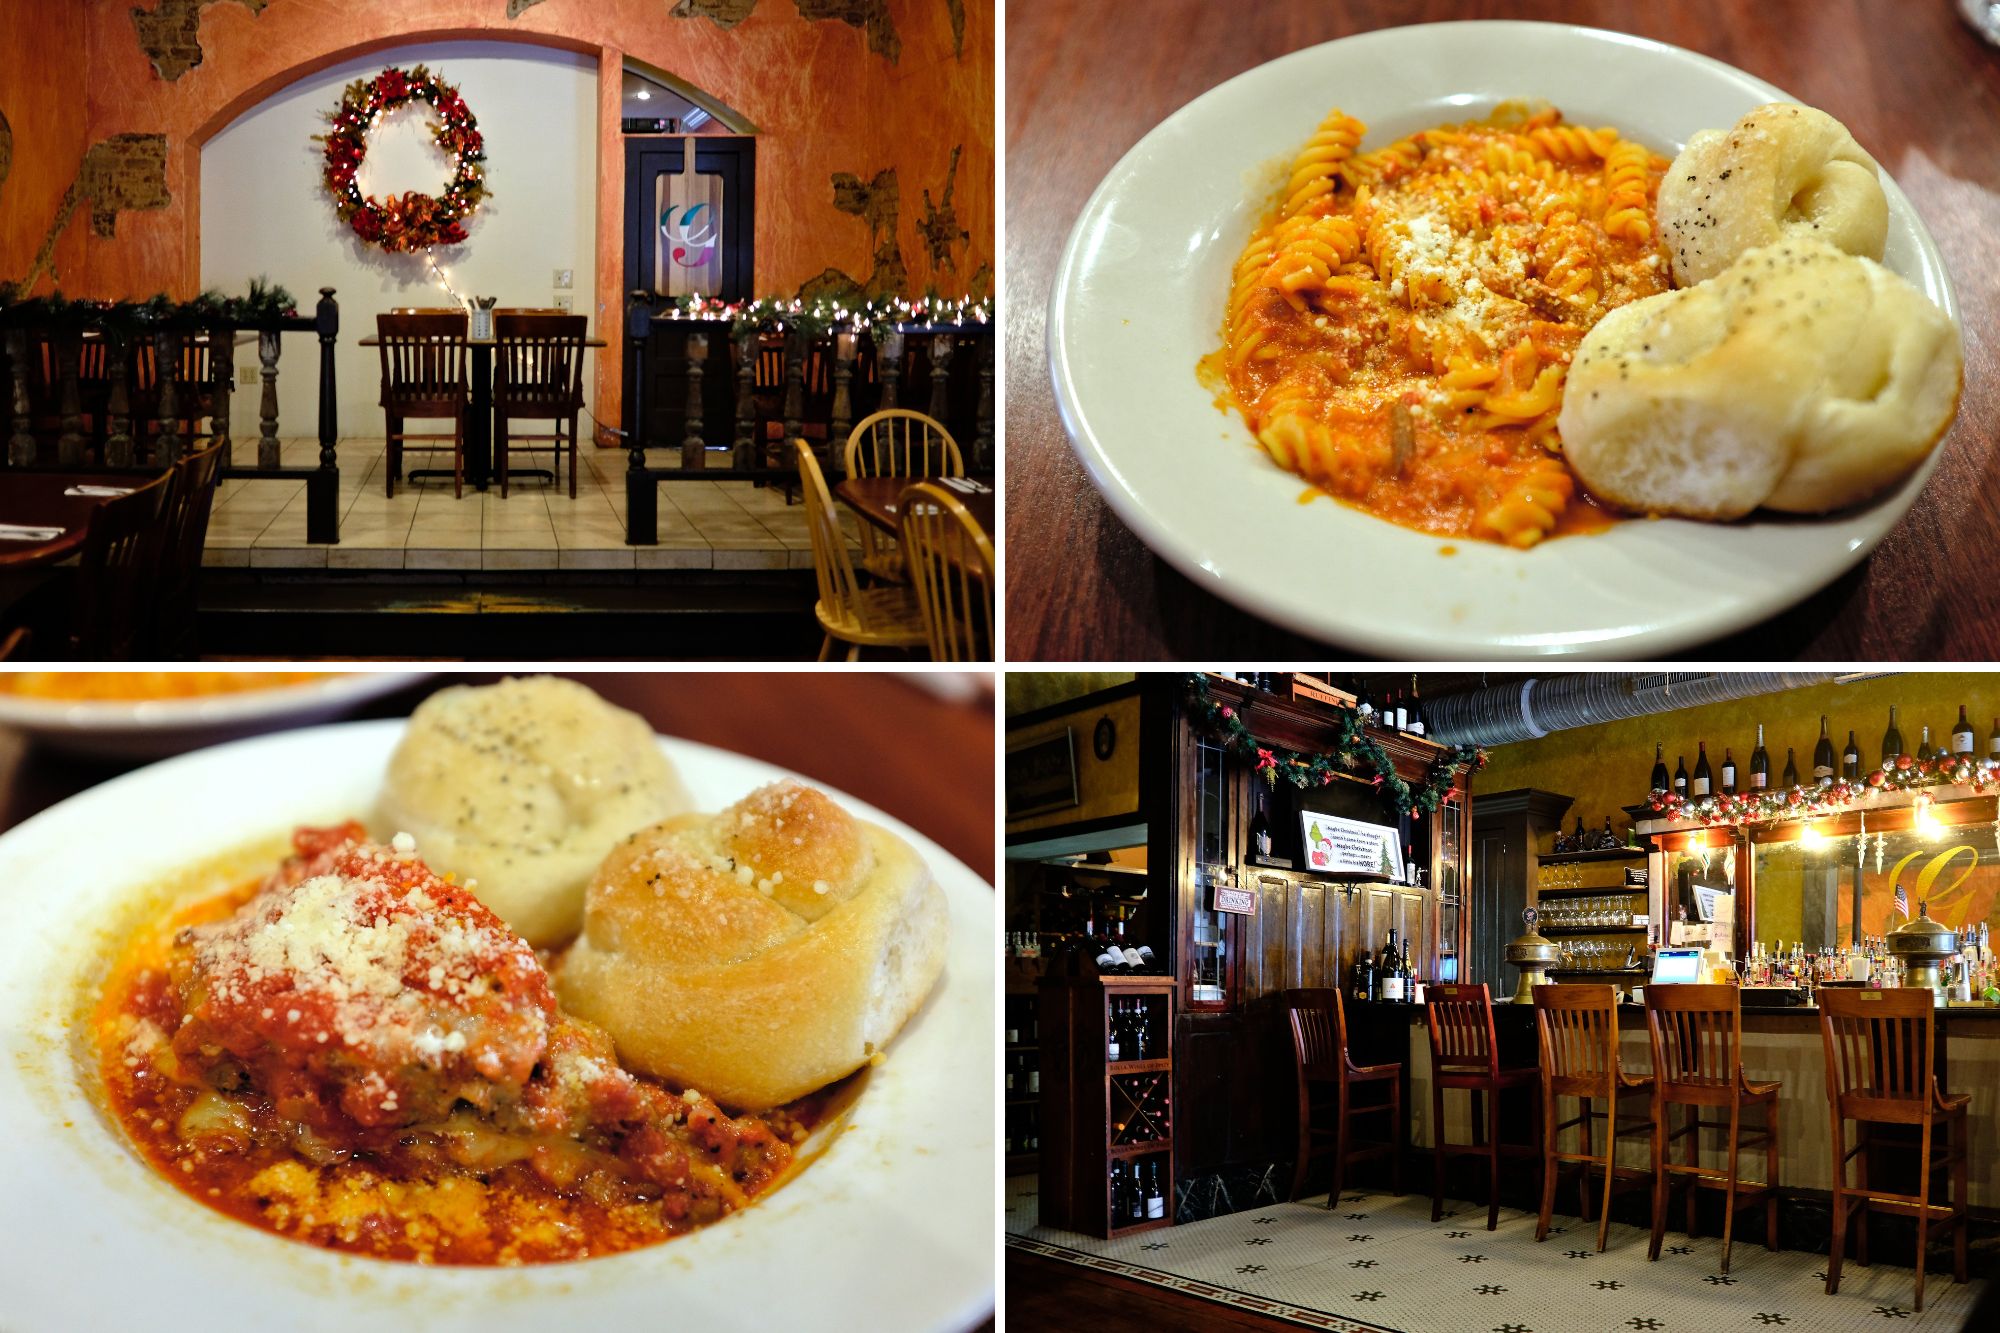 Collage of images inside Gianni's Trattoria and of the pasta dishes